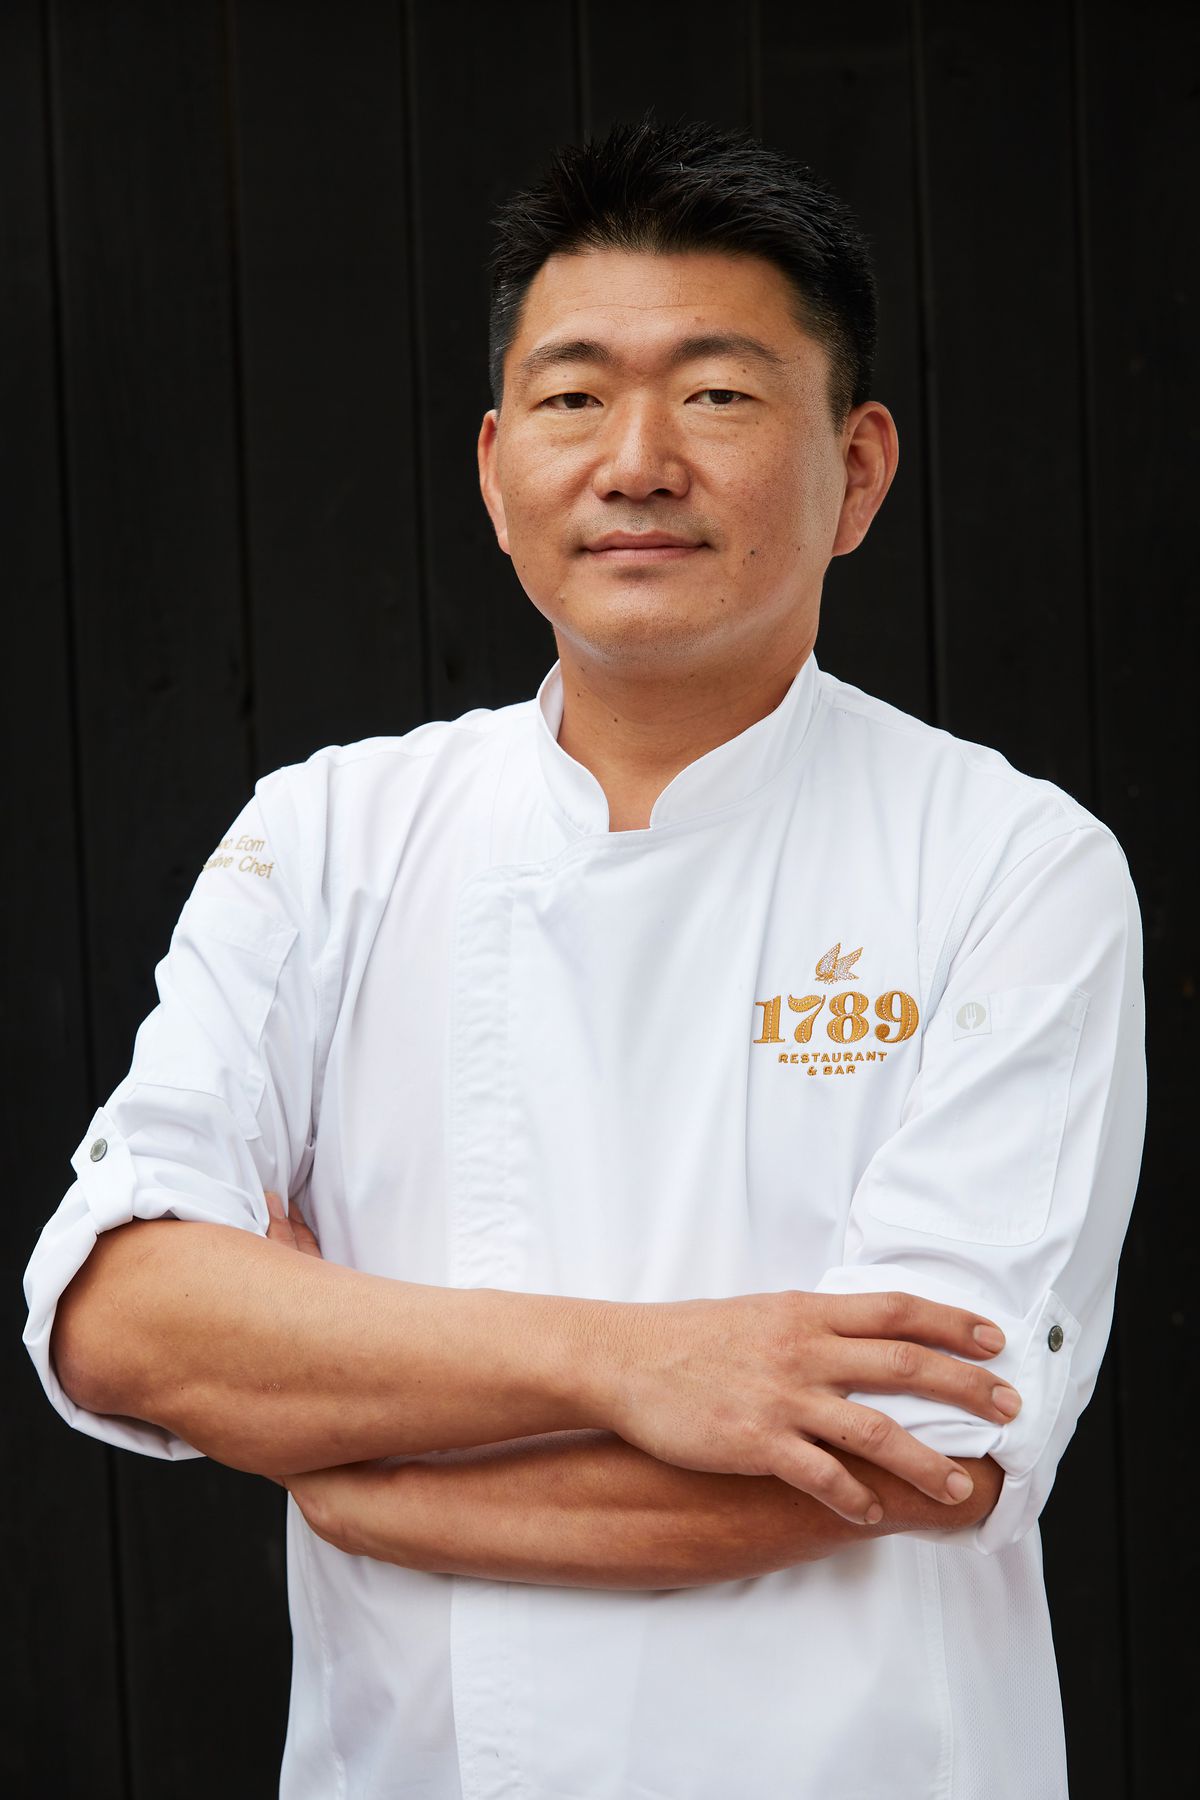 Kyoo Eom is the new executive chef at 1789